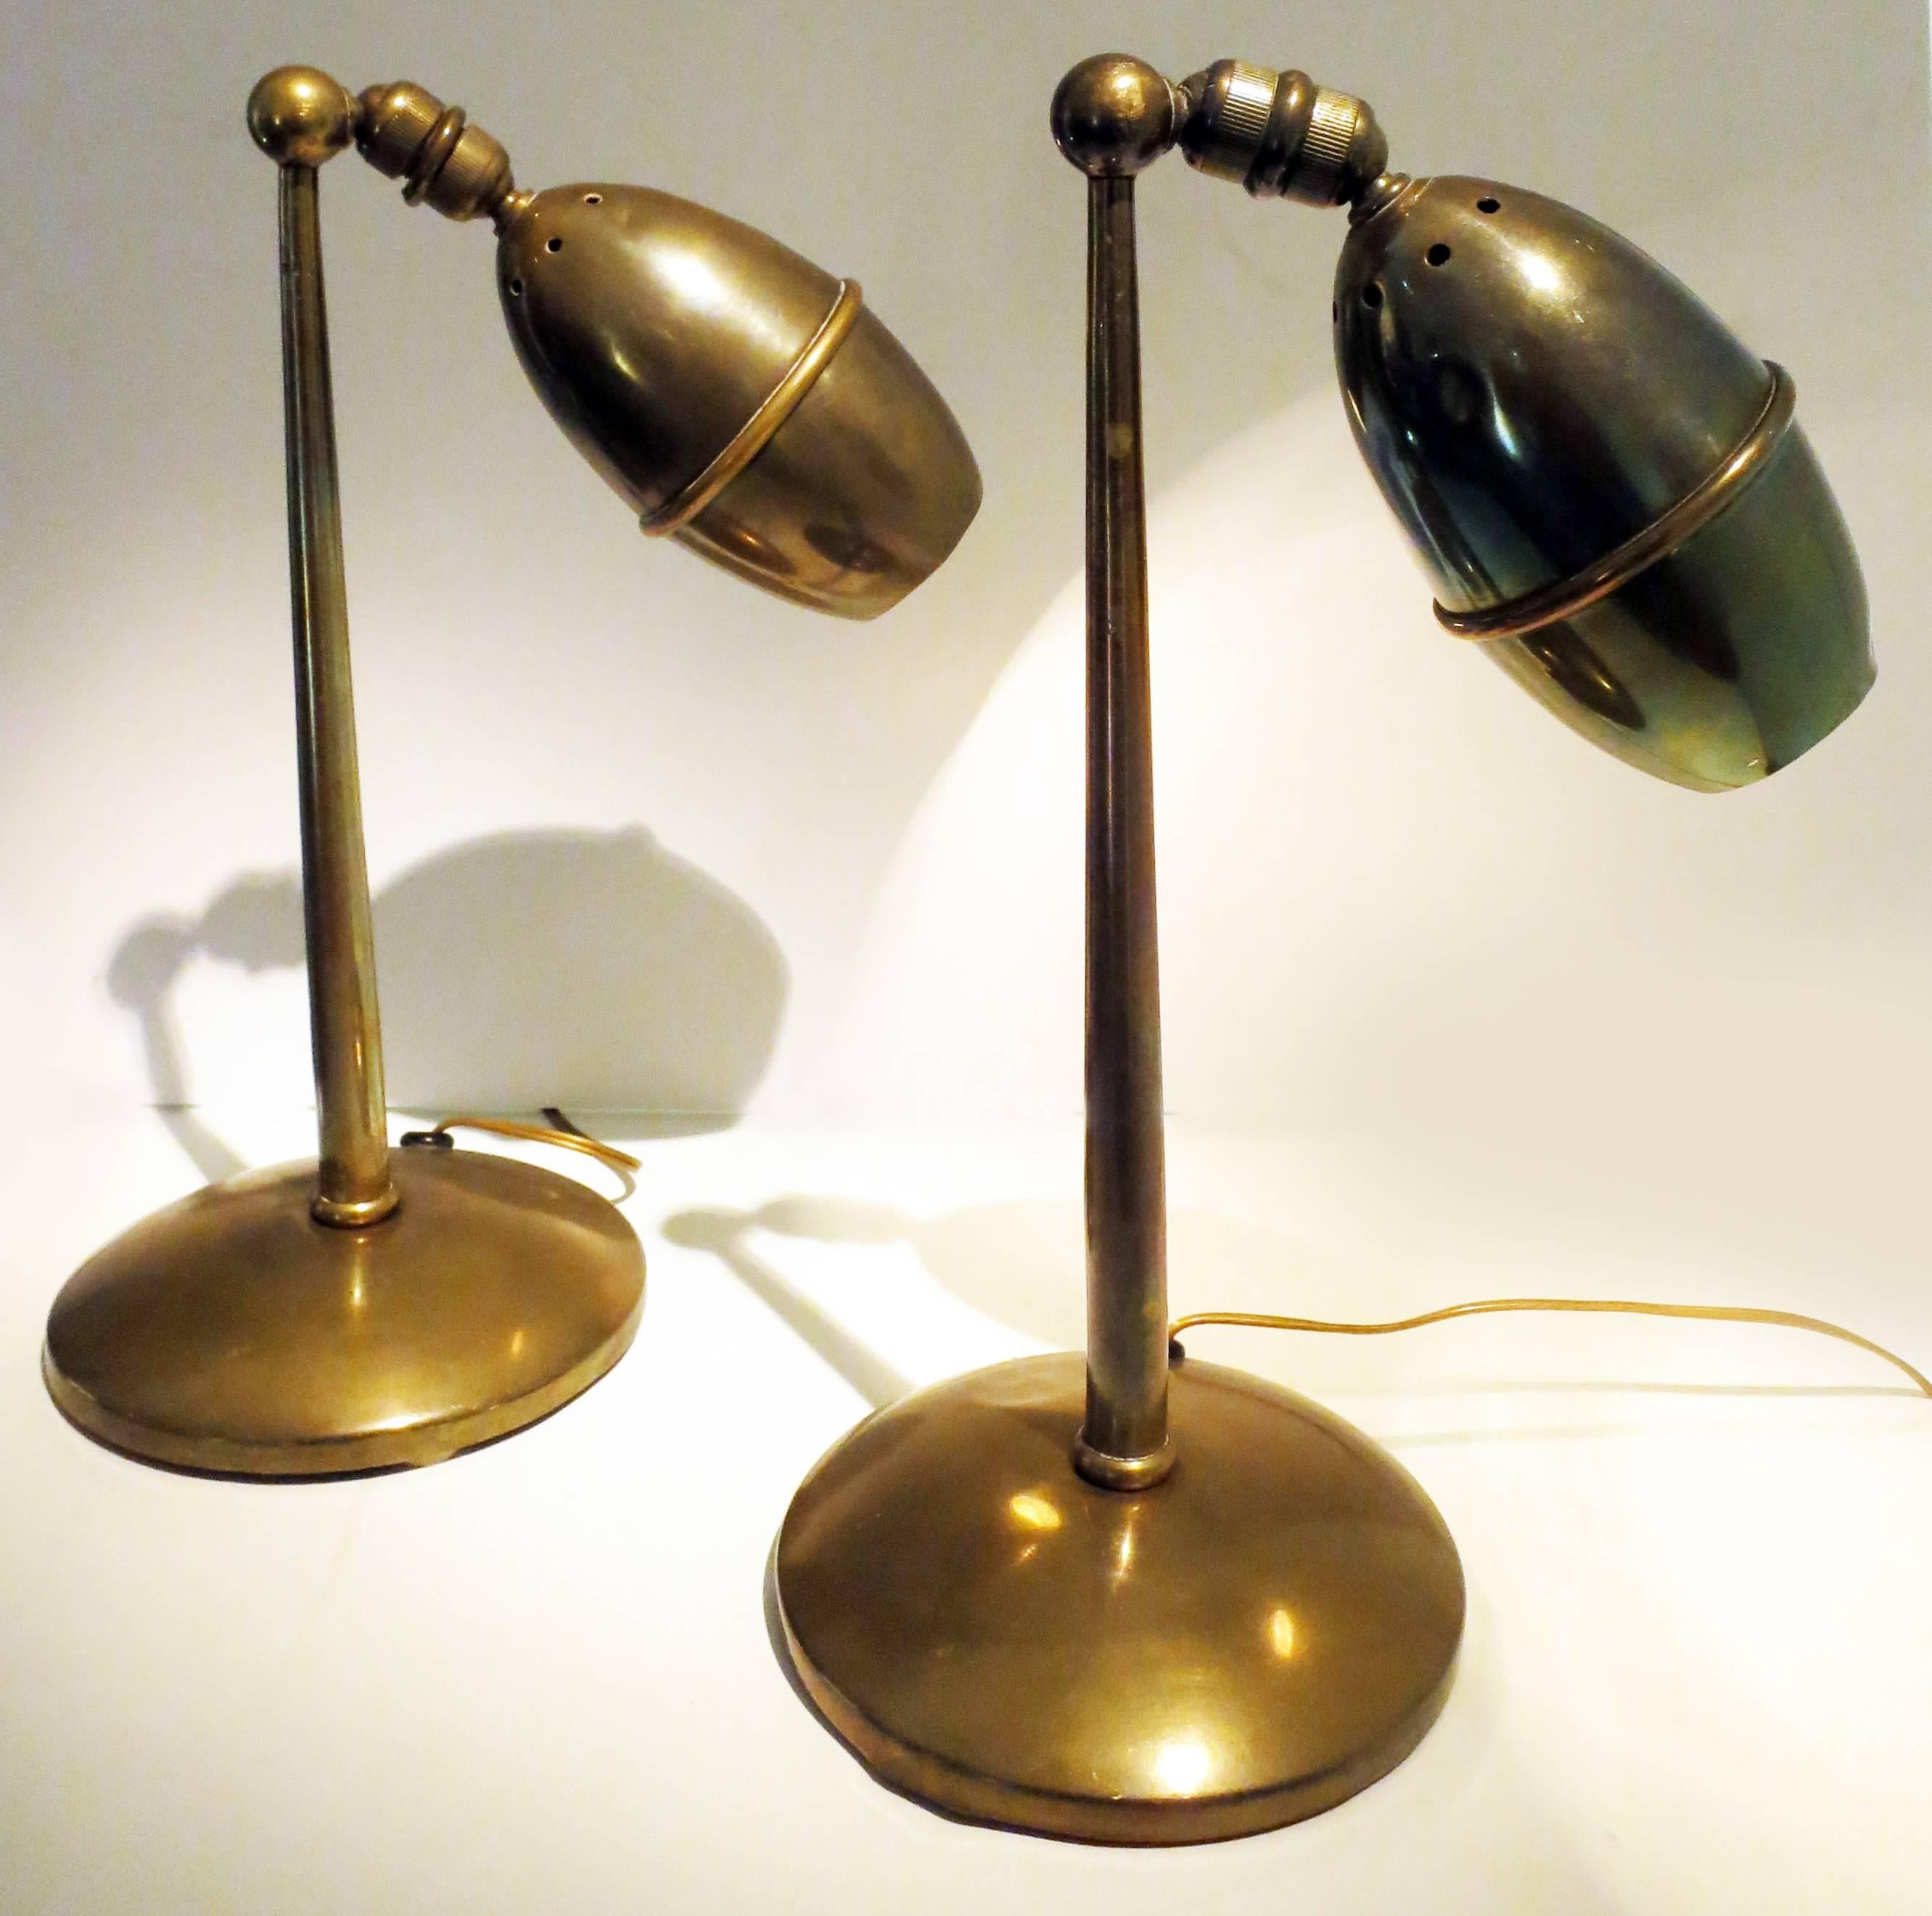 Rare pair of articulated lamps.
Amazing architectural design.
Many positions.
Brass
1950s.